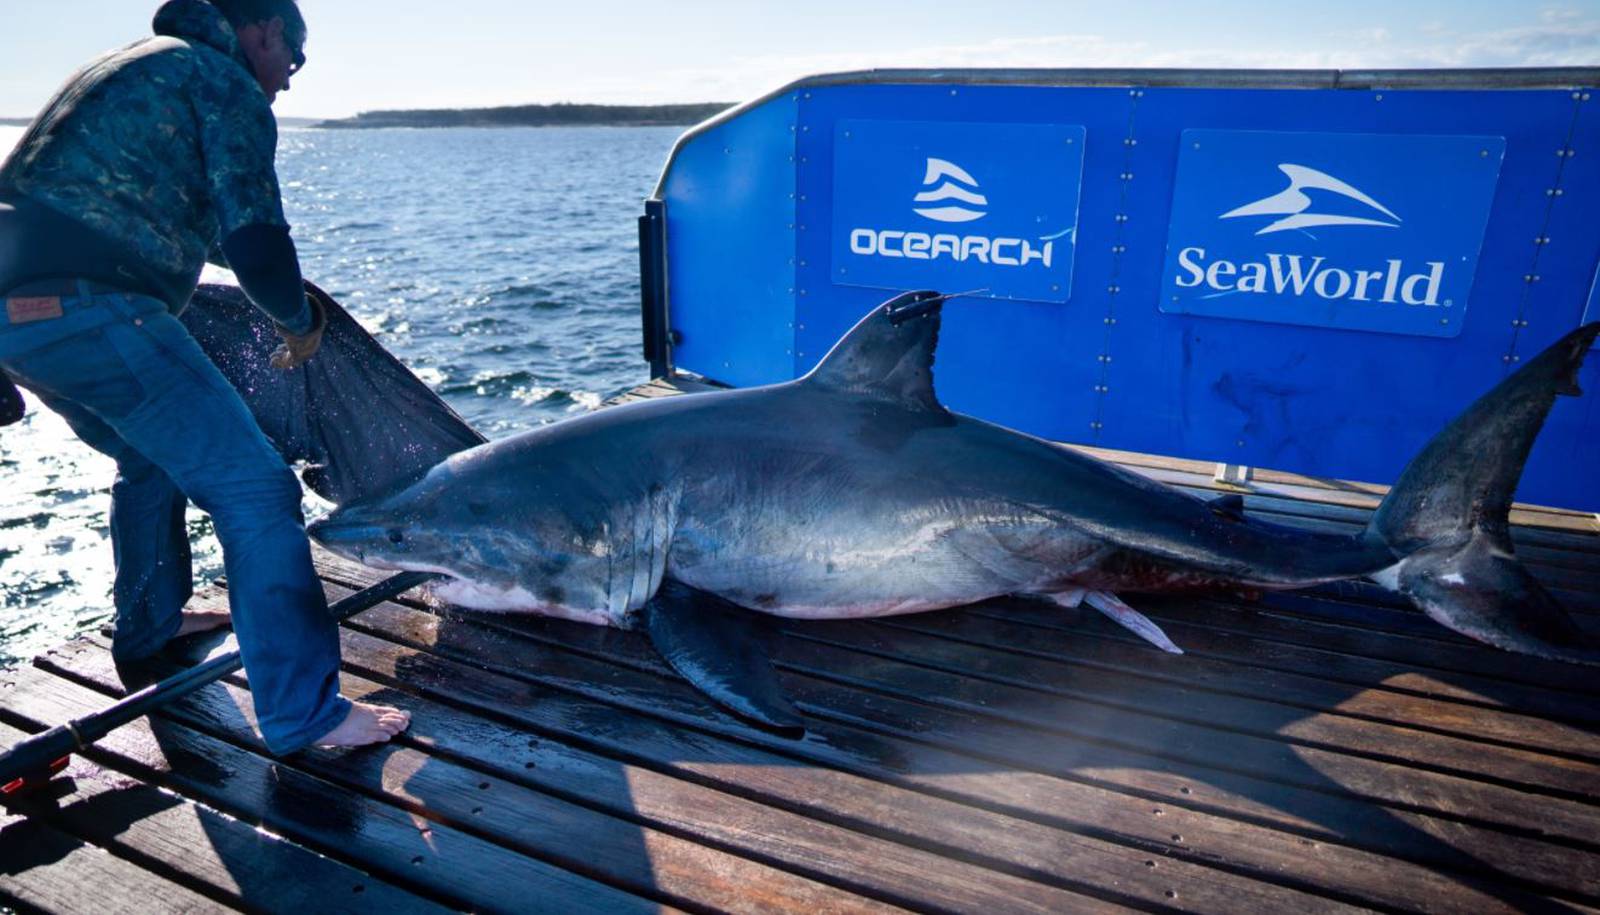 Researchers tracking ‘Scot’ the great white shark off NC’s Outer Banks